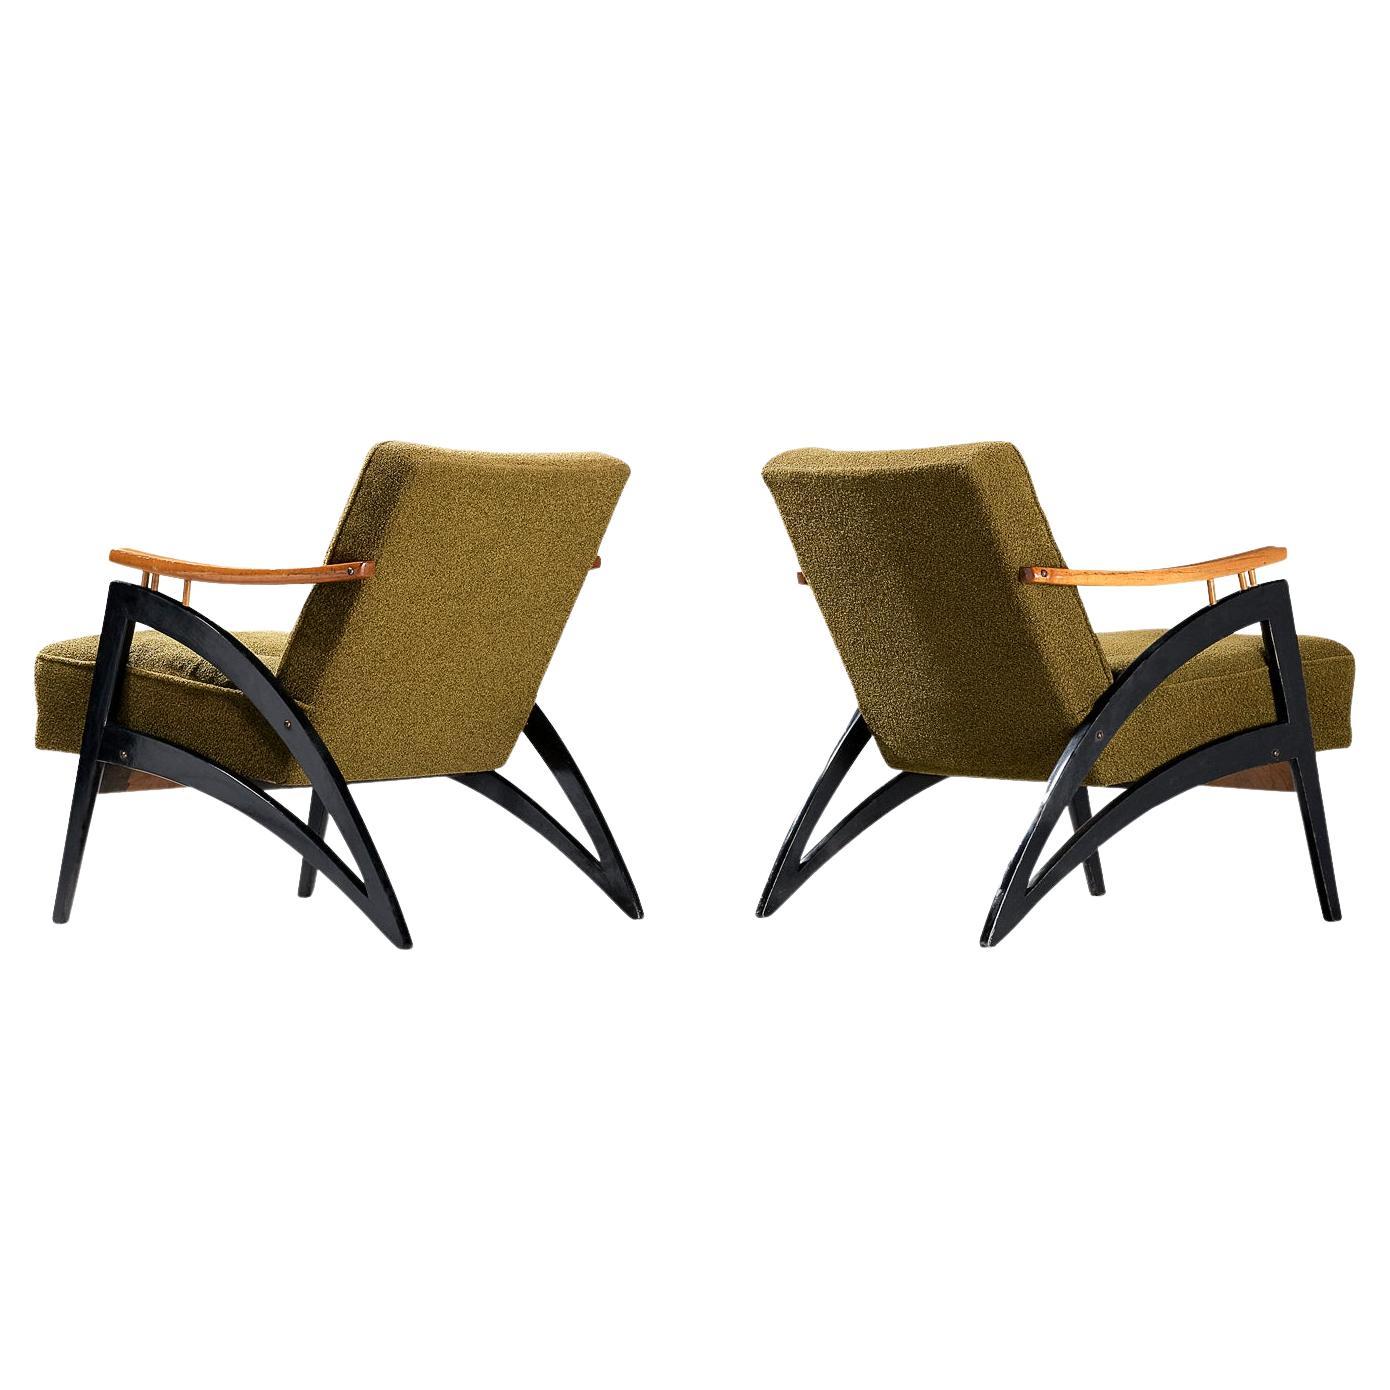 Italian Dynamic Lounge Chairs in Olive Green Upholstery